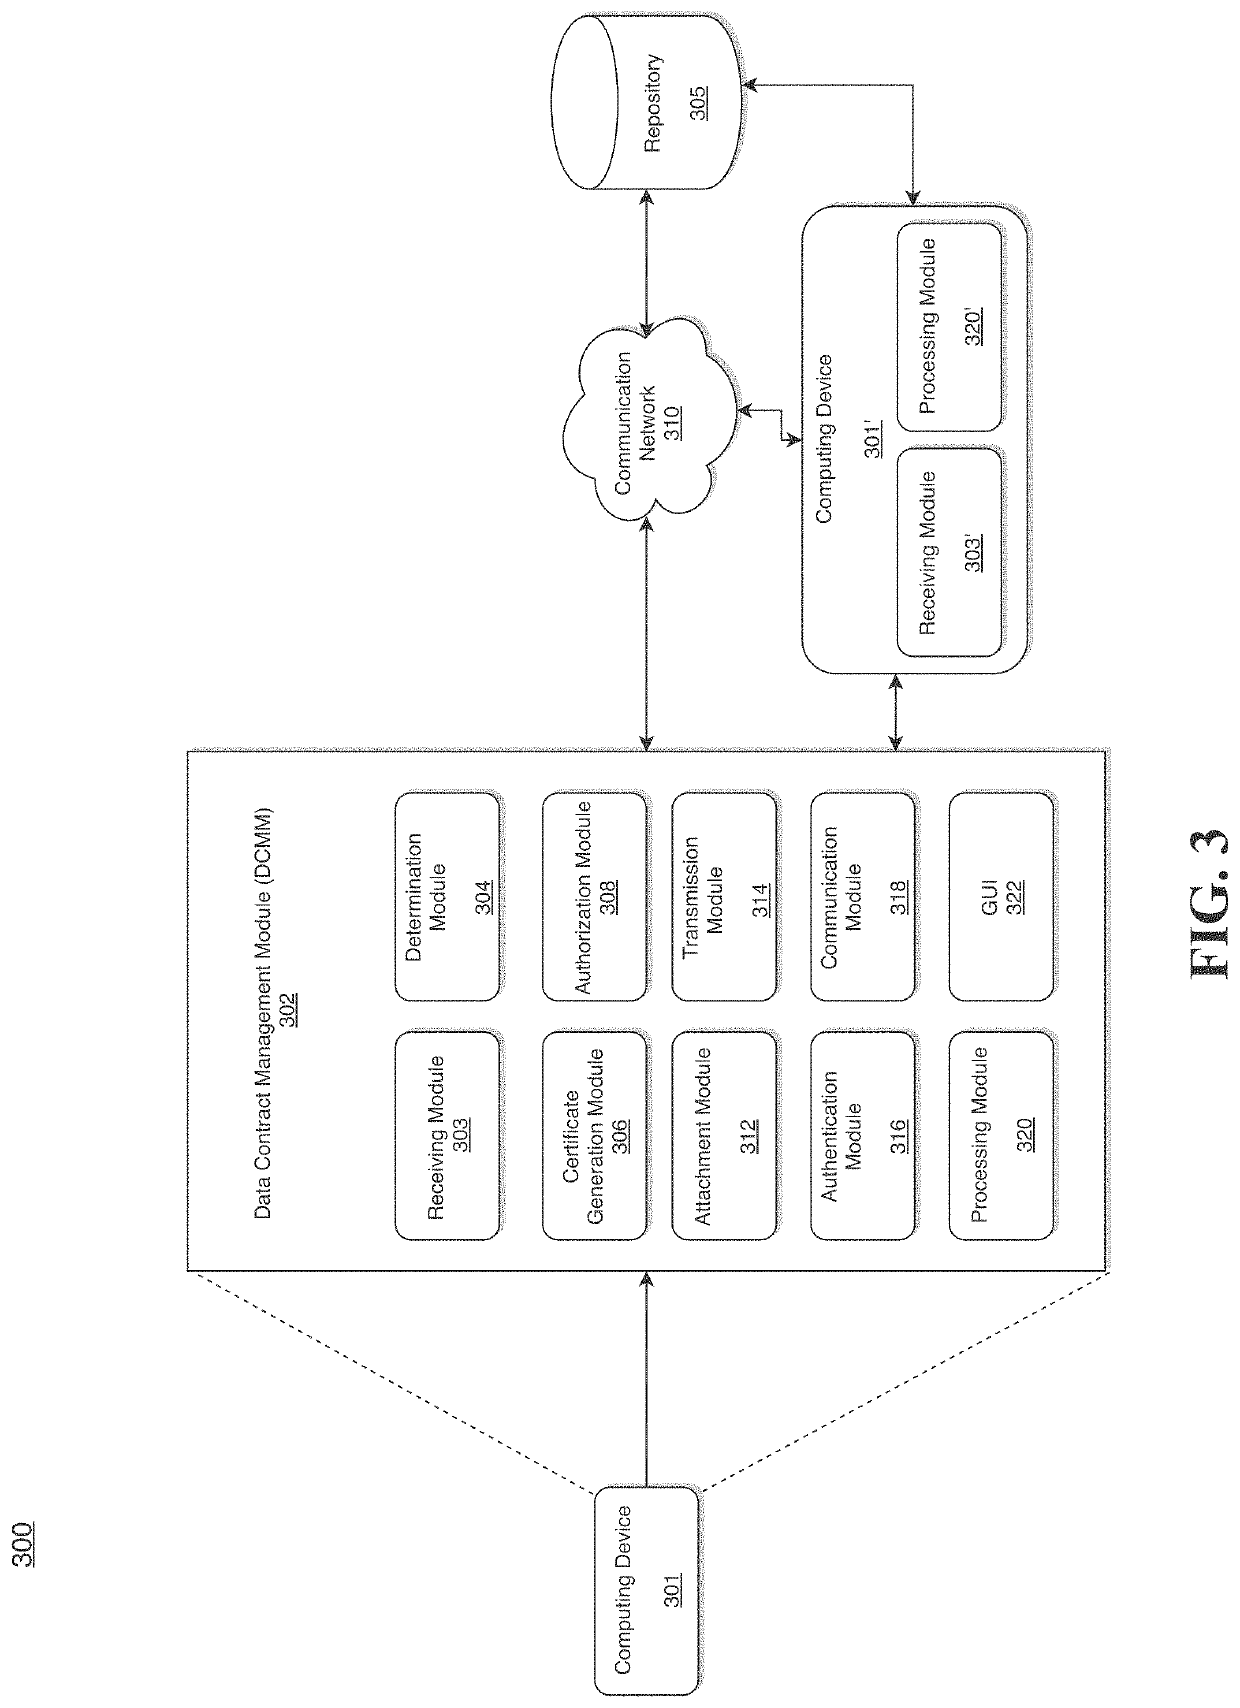 System and method for implementing a data contract management module